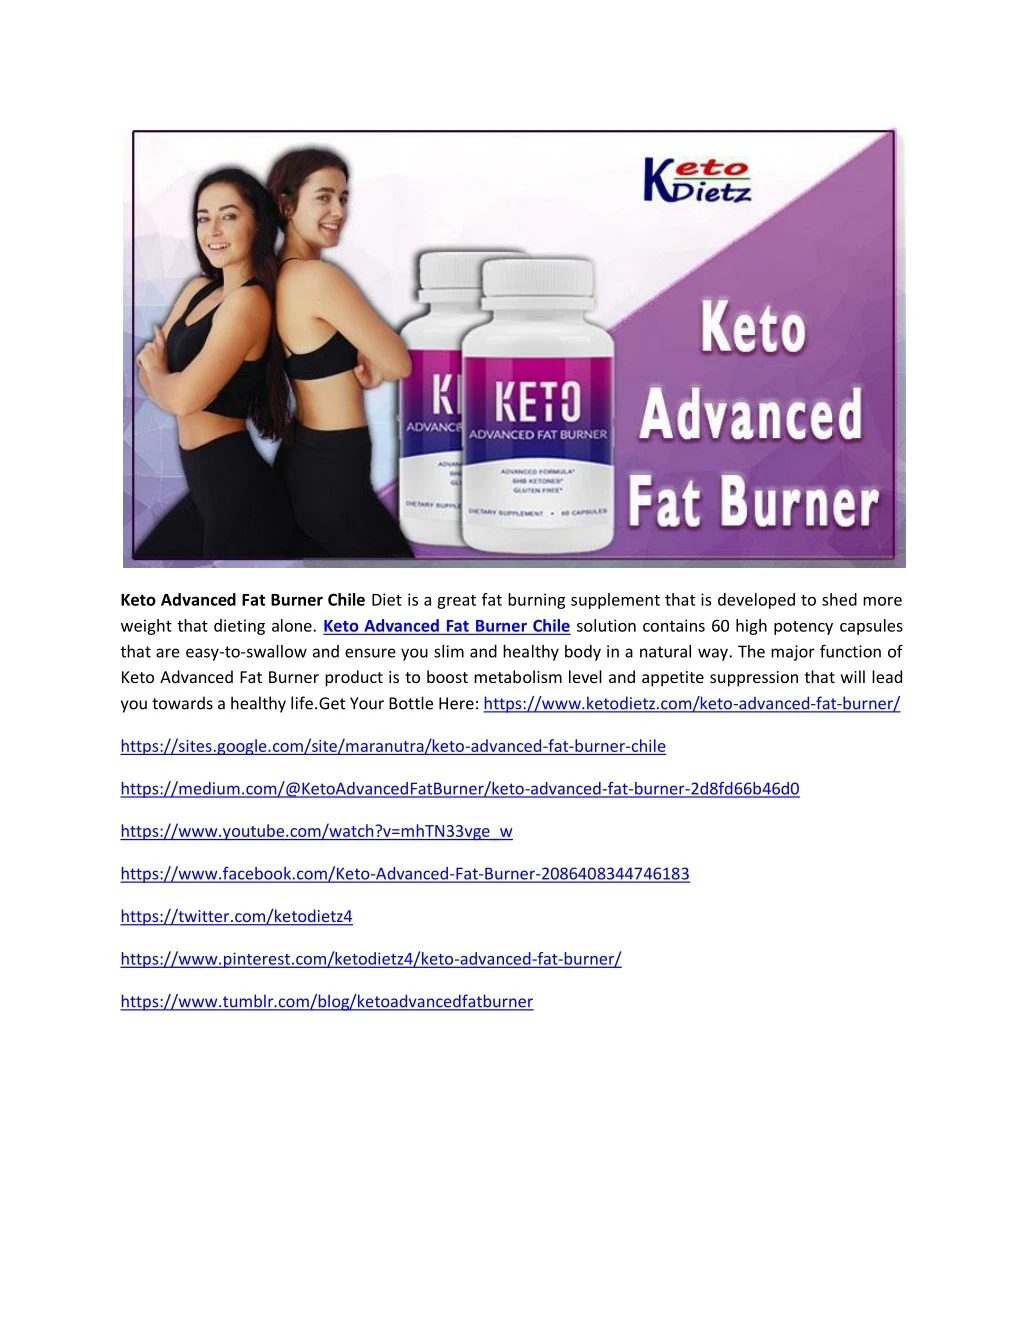 keto advanced fat burner chile diet is a great